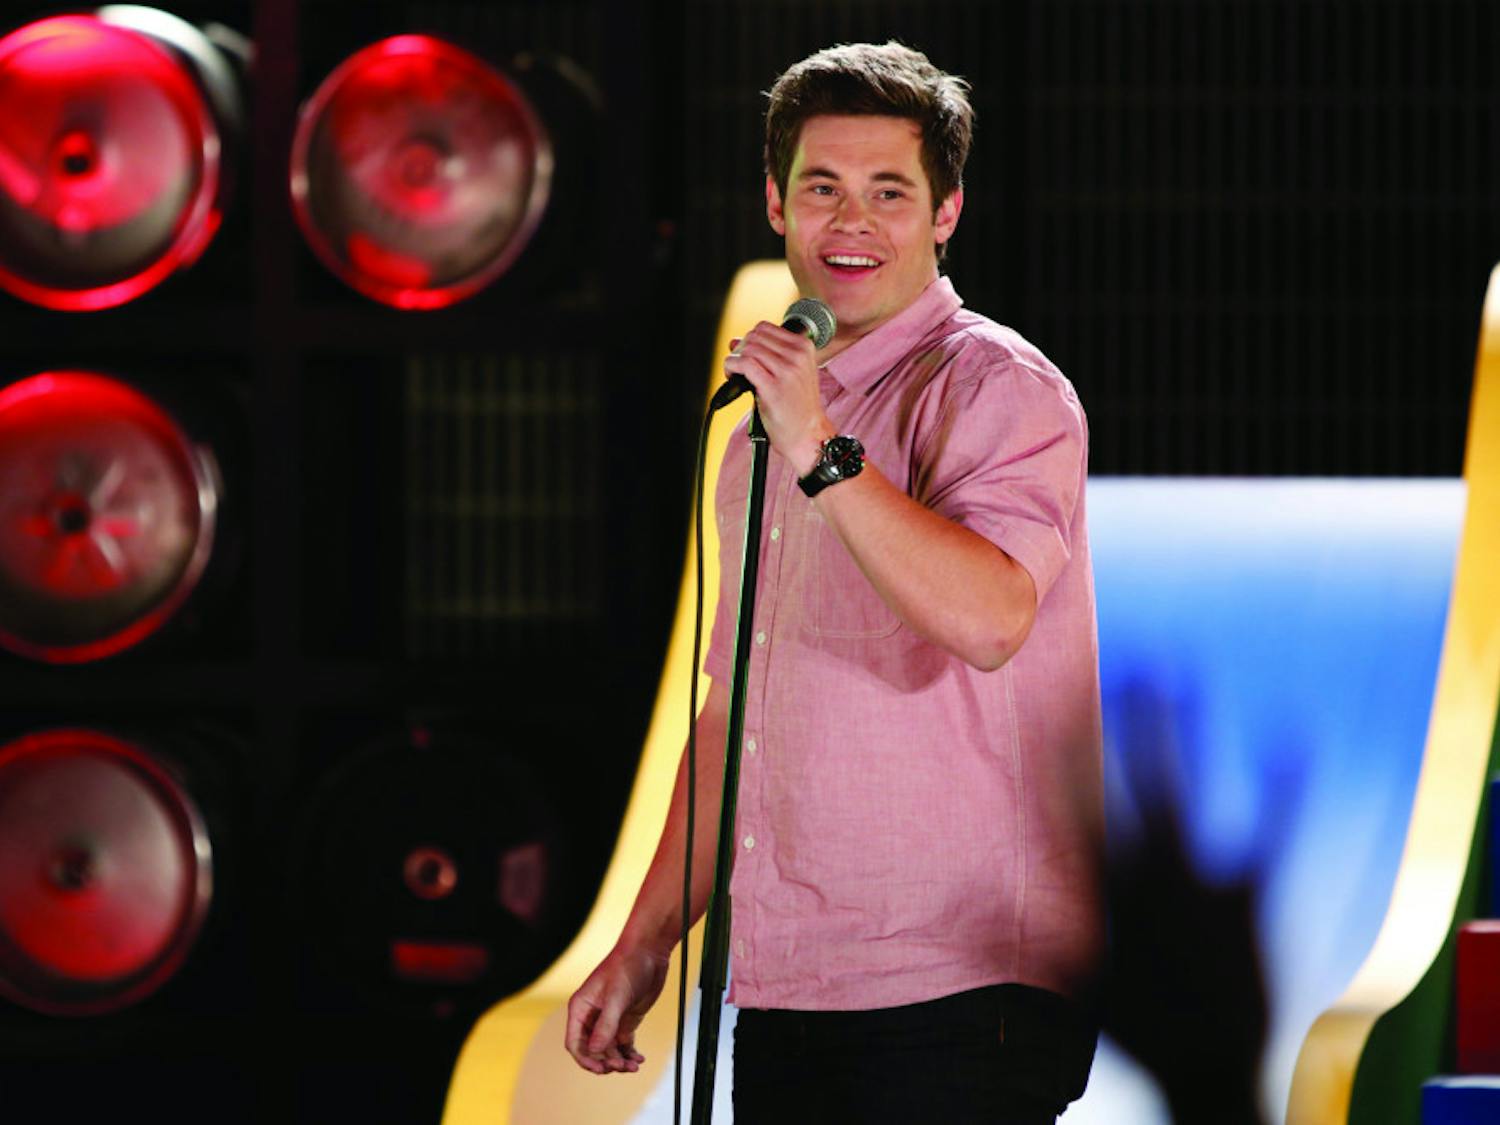 Adam Devine’s new Comedy Central series, “Adam Devine’s House Party,” airs Thursday at 12:30 a.m. He hosts a stand-up showcase.